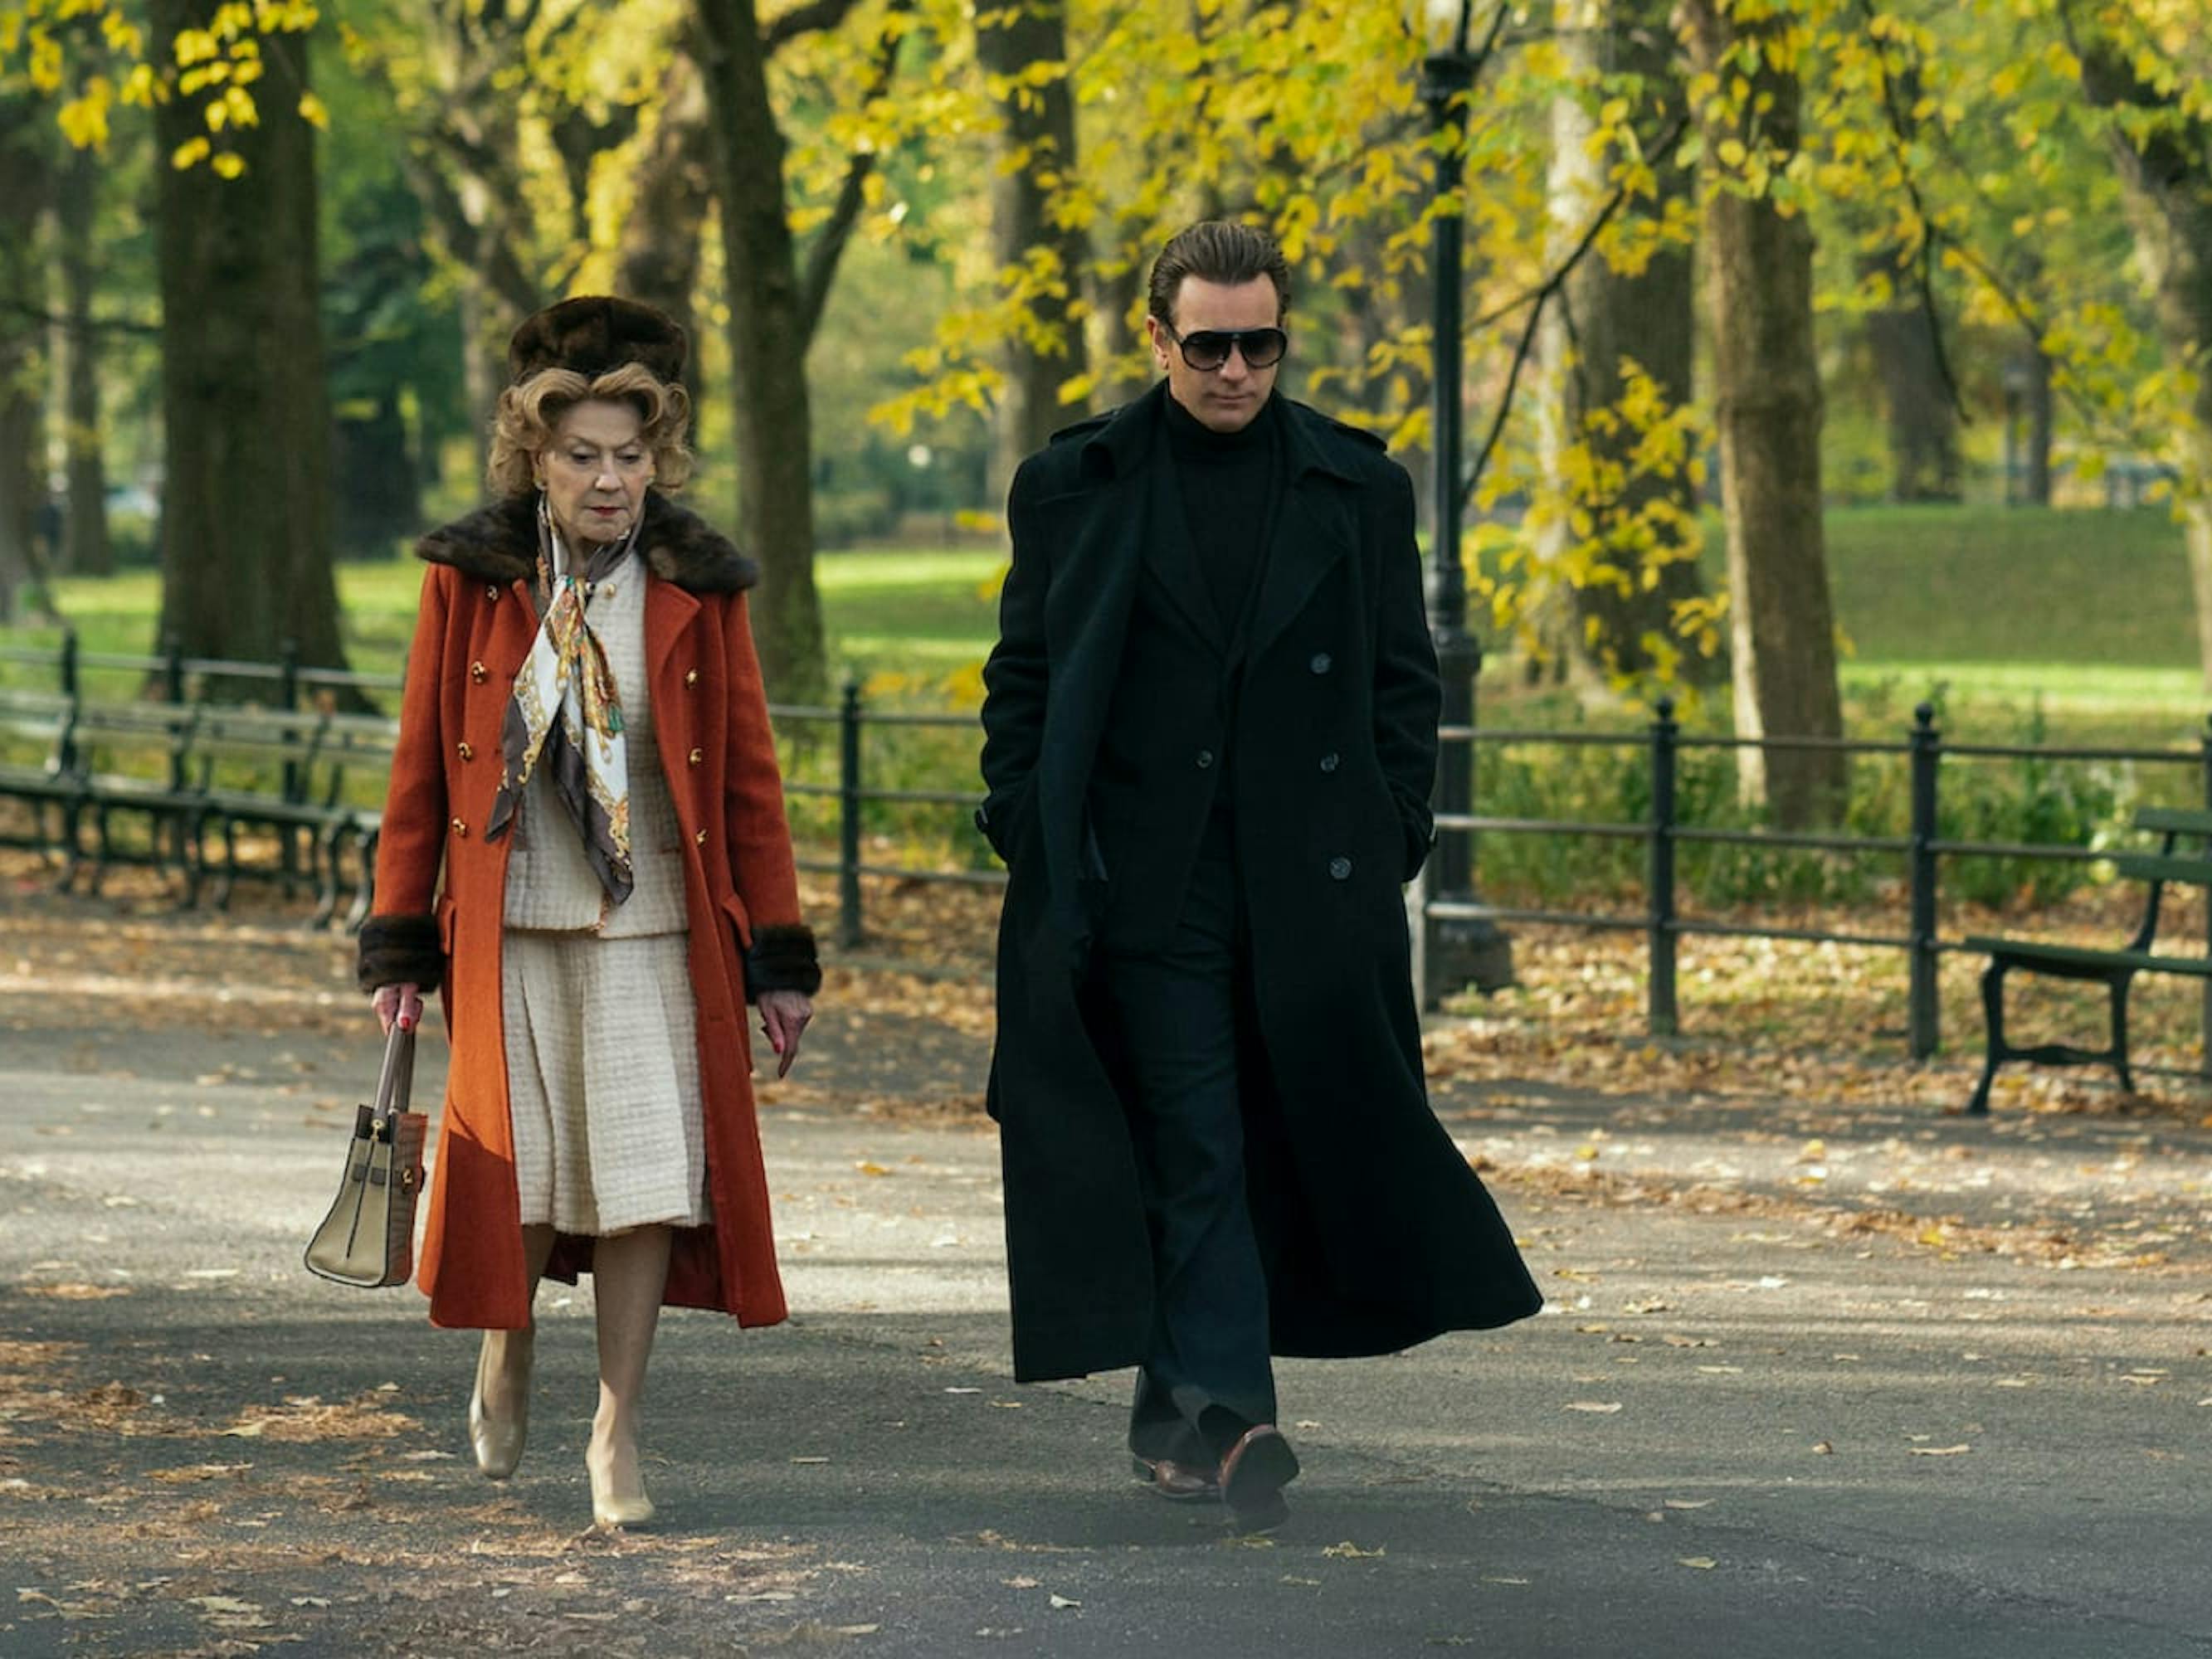 Eleanor Lambert (Kelly Bishop) and Halston (Ewan McGregor) walk in Central Park. Lambert wears a glorious orange coat trimmed with fur. Halston stands out in his signature all black look, including sunglasses. The fall leaves, trees, and empty benches are reminiscent of When Harry Met Sally’s epic shot. 